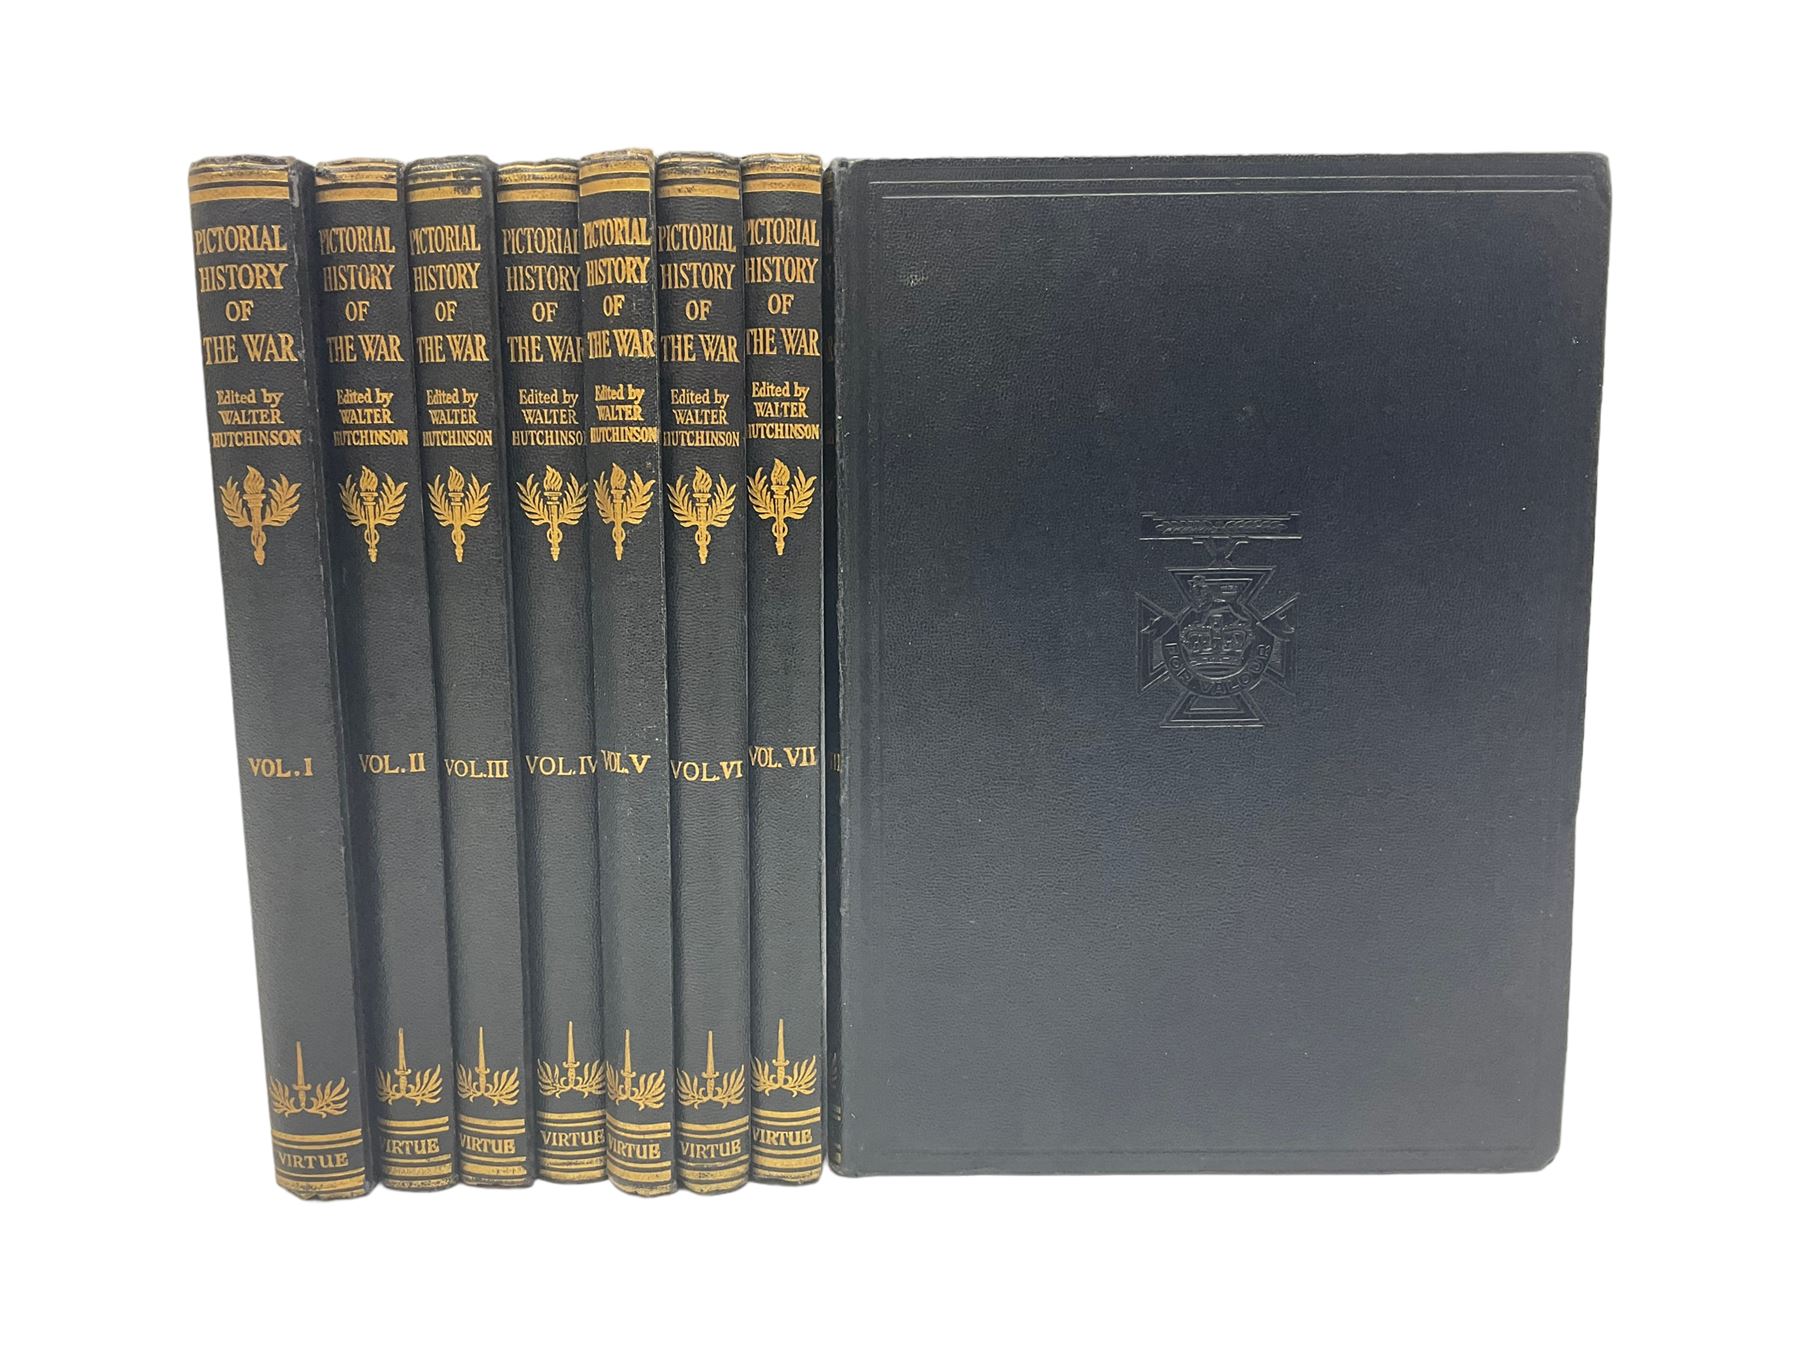 Eight volumes of Pictorial History of War edited by Walter Hutchinson